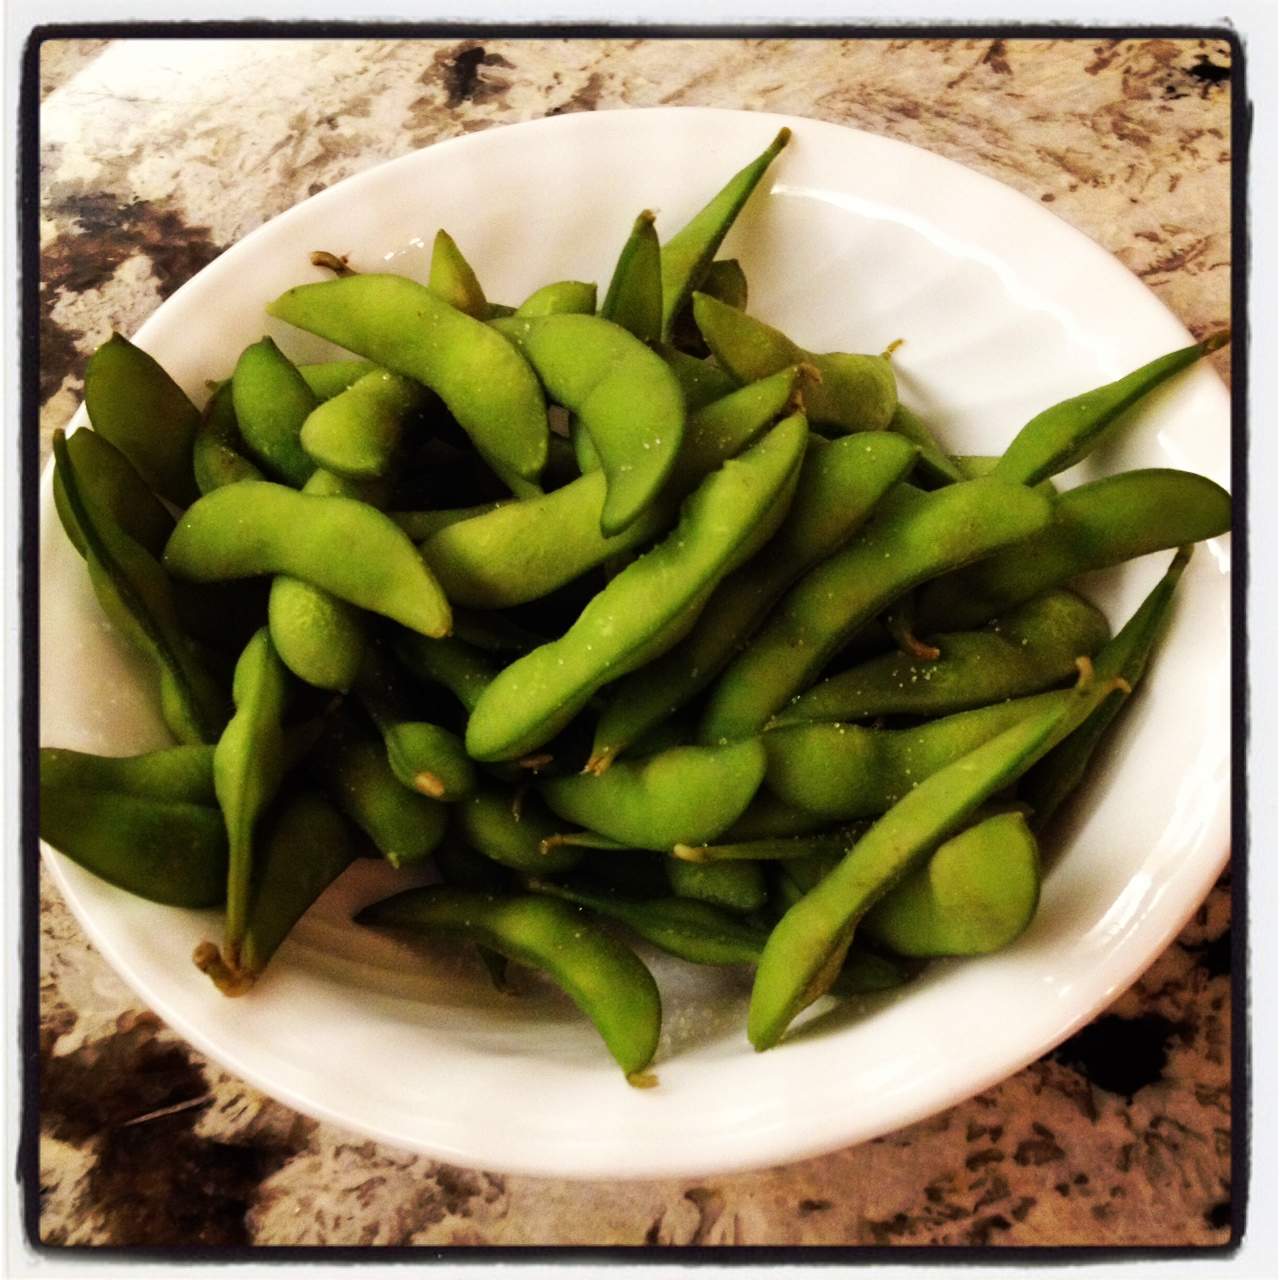 All about Edamame! - Dietetic Directions - Dietitian and Nutritionist ...